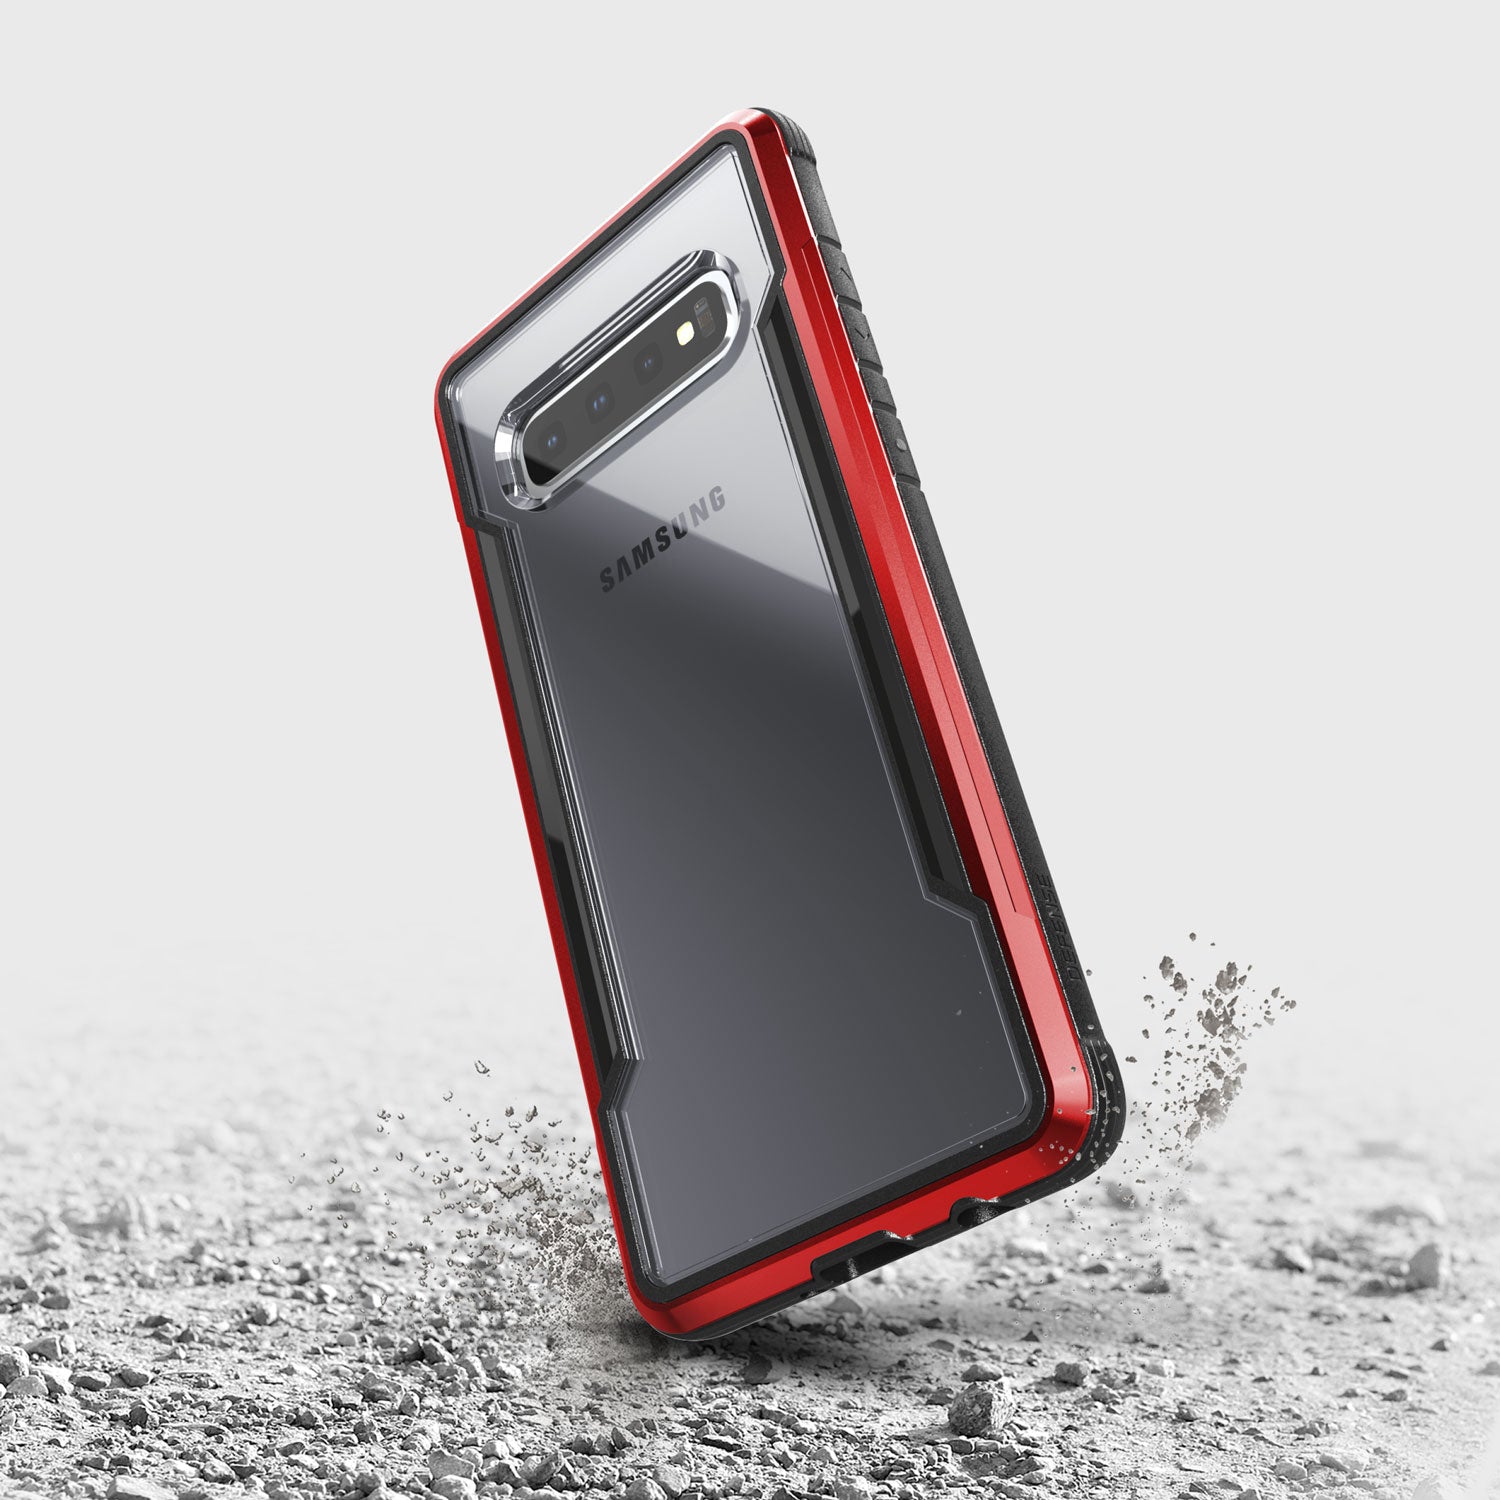 Phone case for Samsung Galaxy S10 Plus with drop protection, available in red and black.
Samsung Galaxy S10 Plus Case Raptic Shield Red by X-Doria, with drop protection, available in red and black.